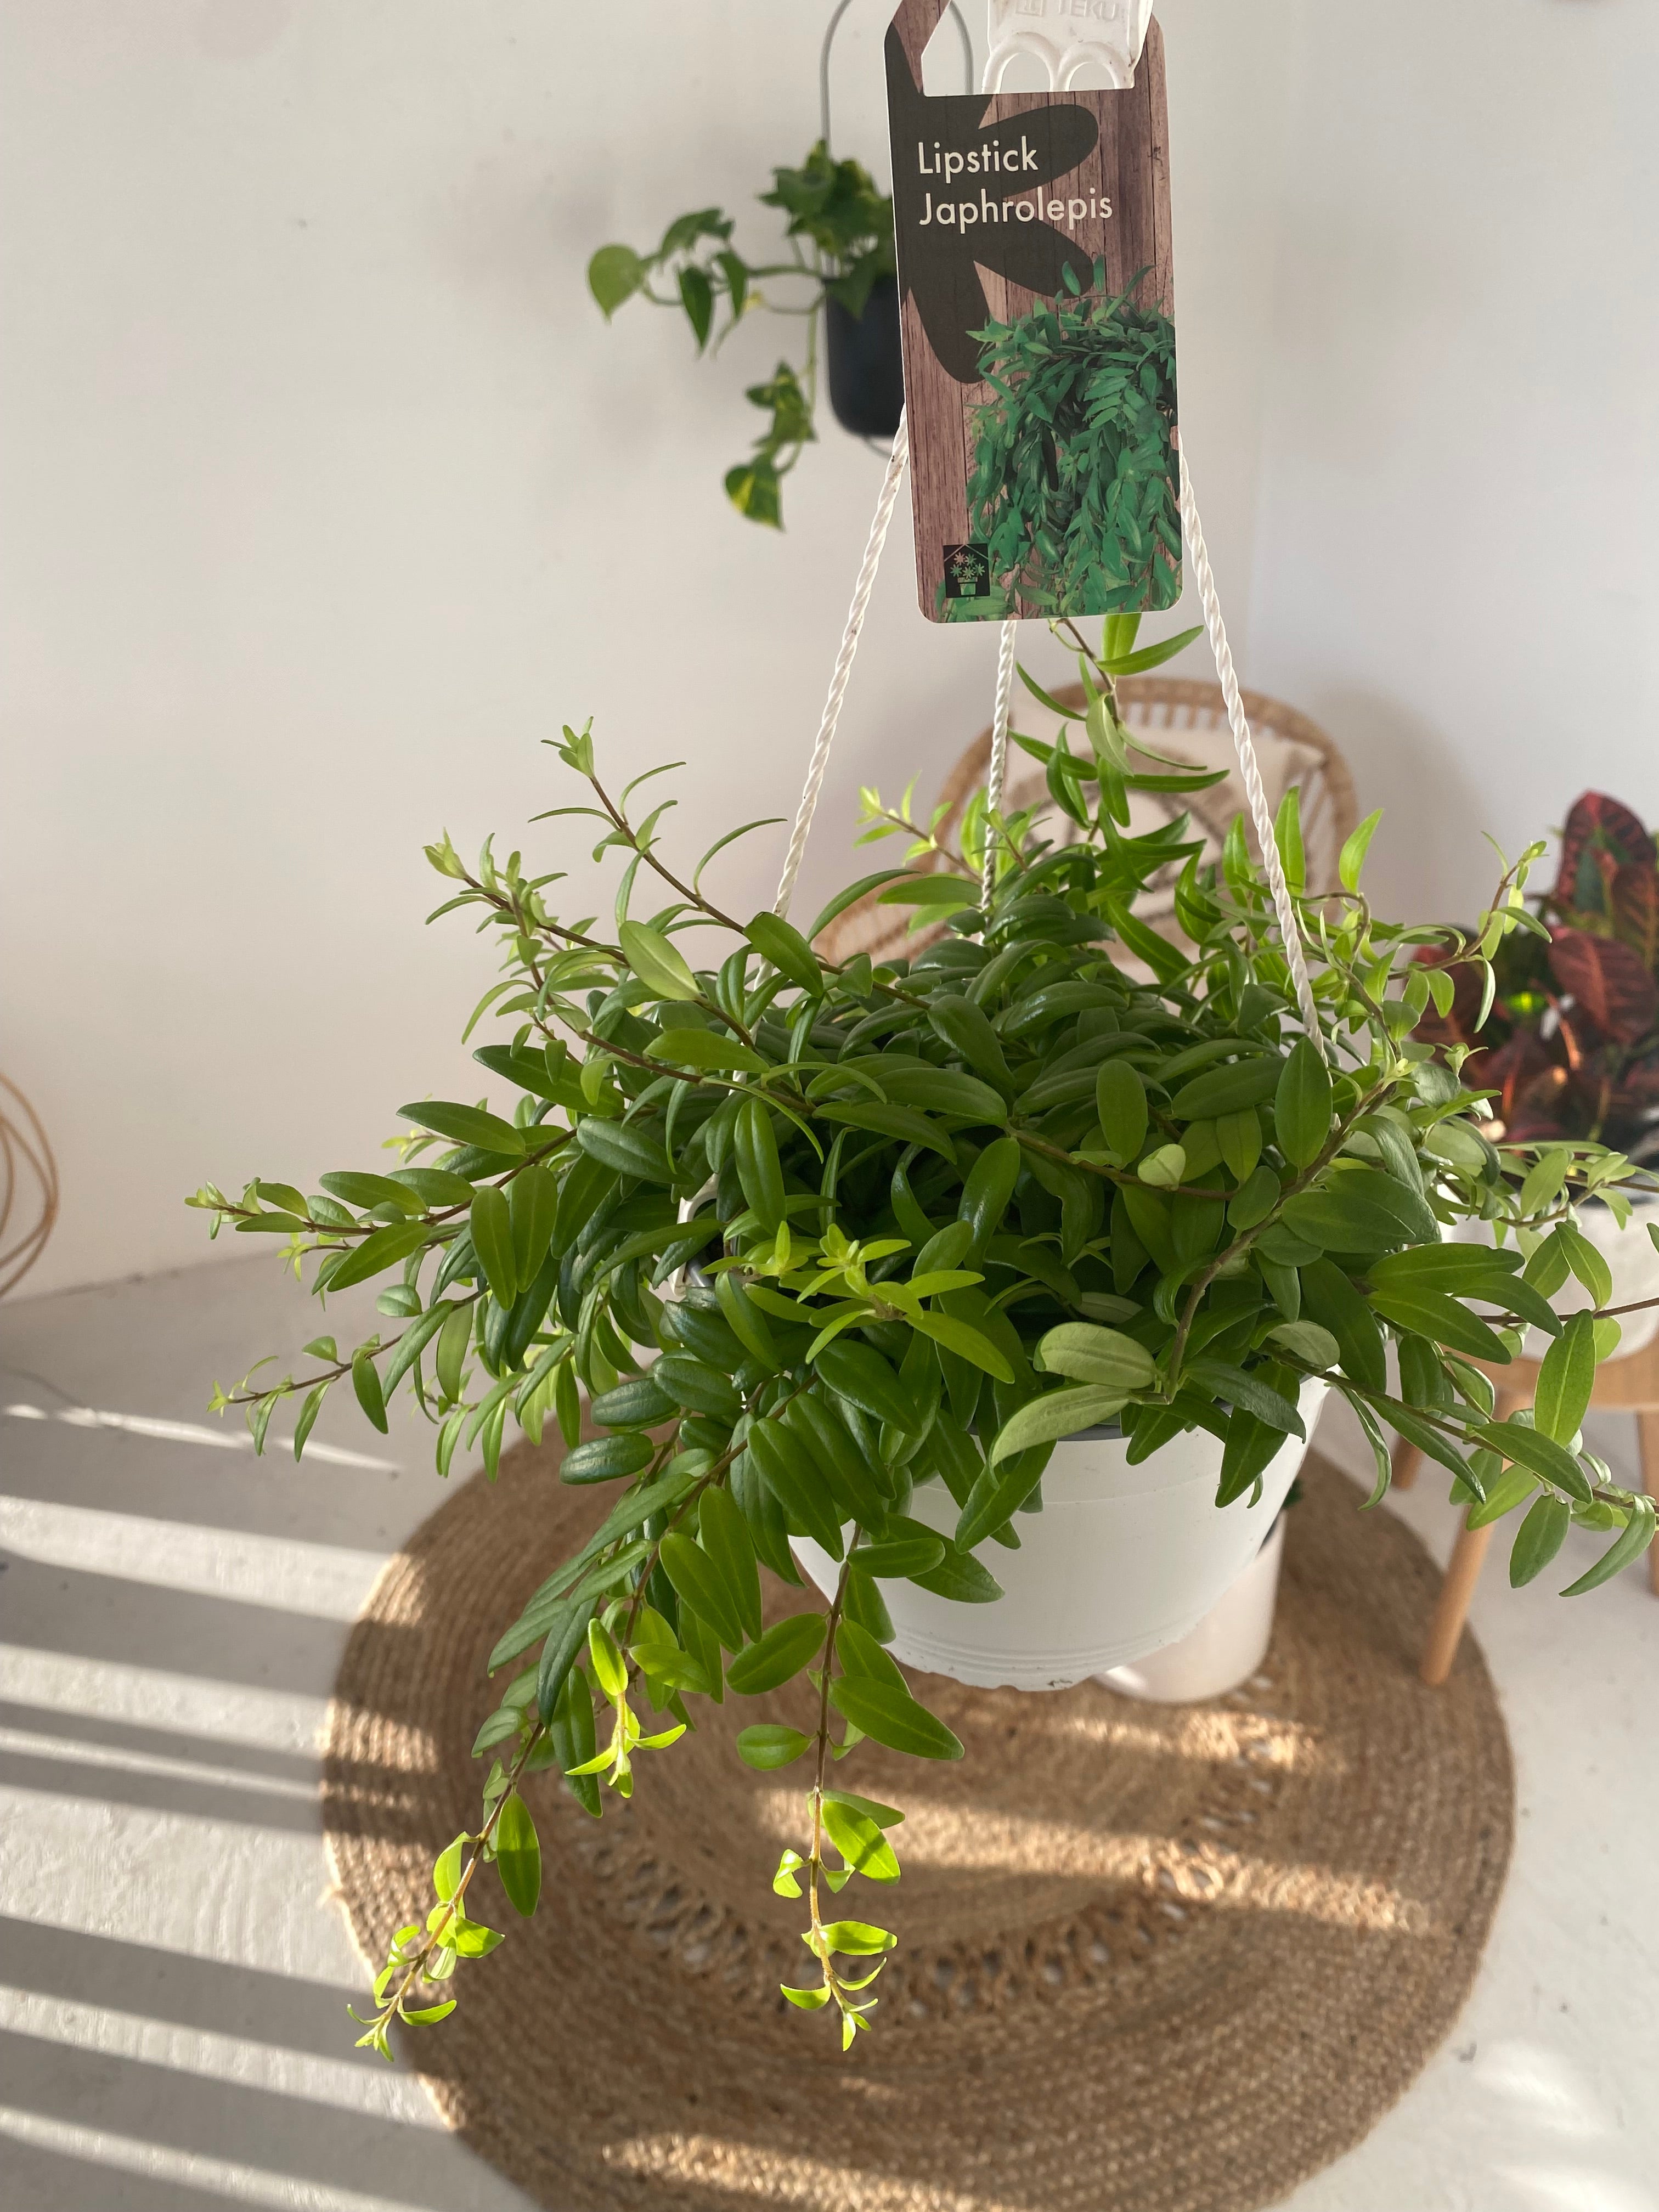 Facebook Marketplace - 7" Hanging Planter and Plant